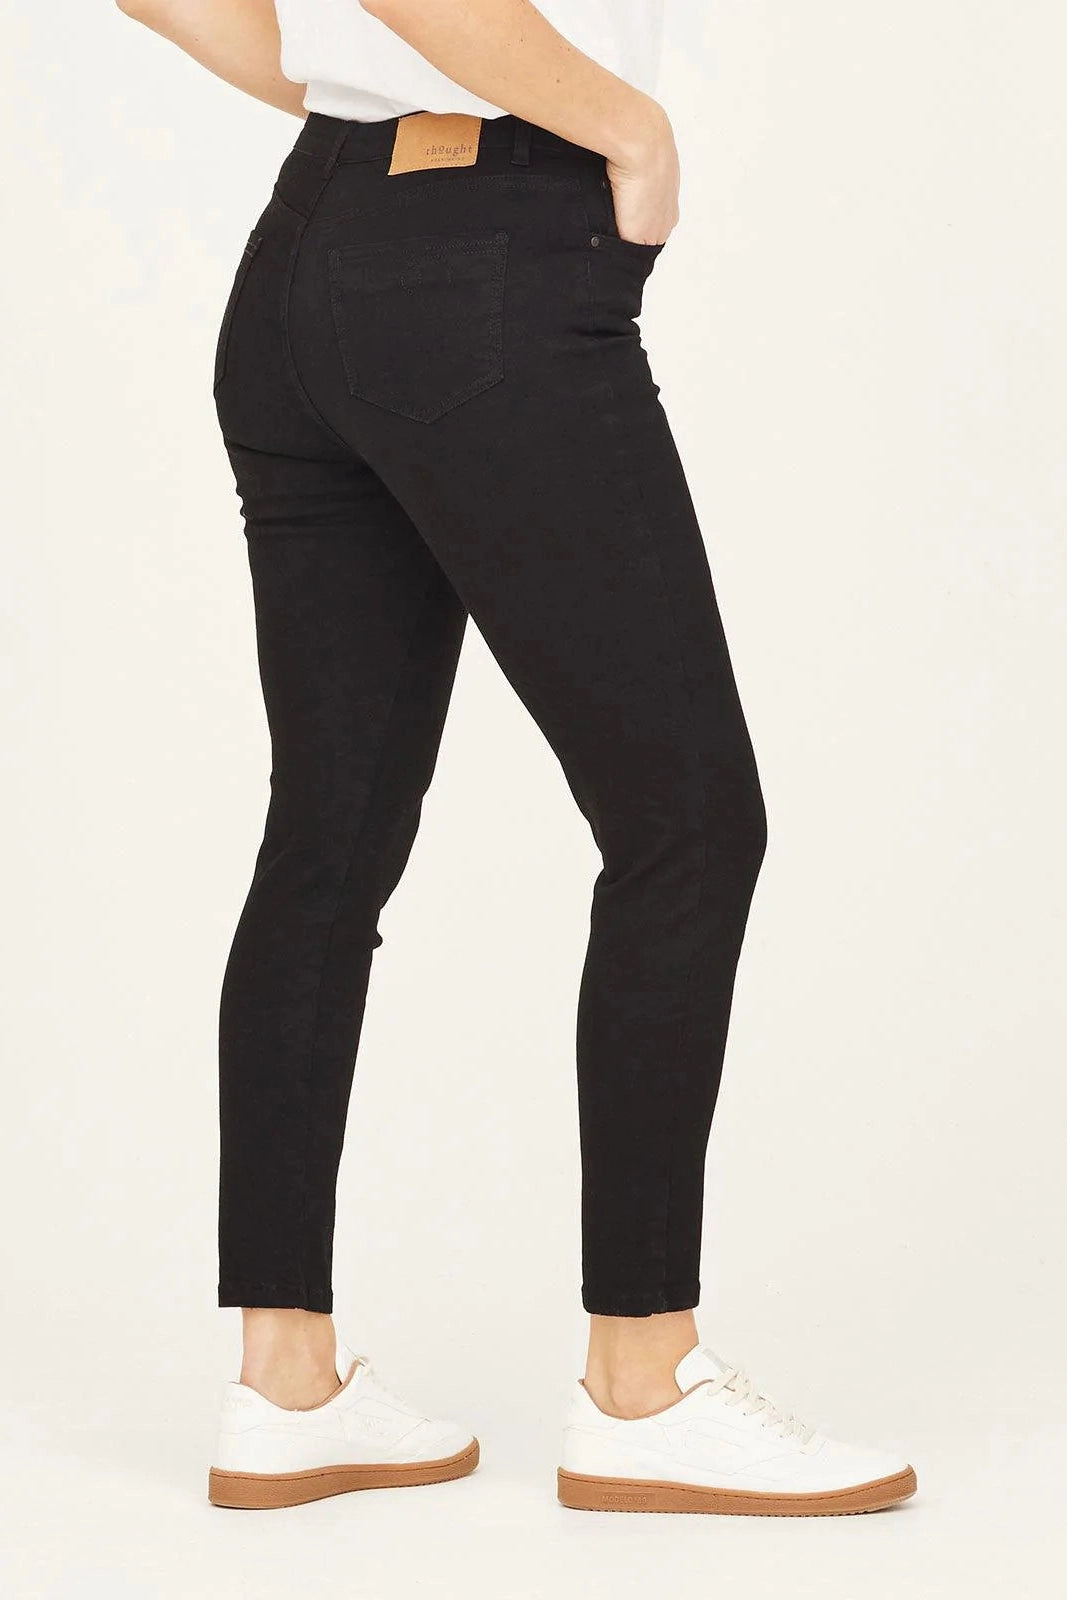 Thought GOTS Organic Cotton High-Rise Skinny Jeans in Black-Womens-Ohh! By Gum - Shop Sustainable